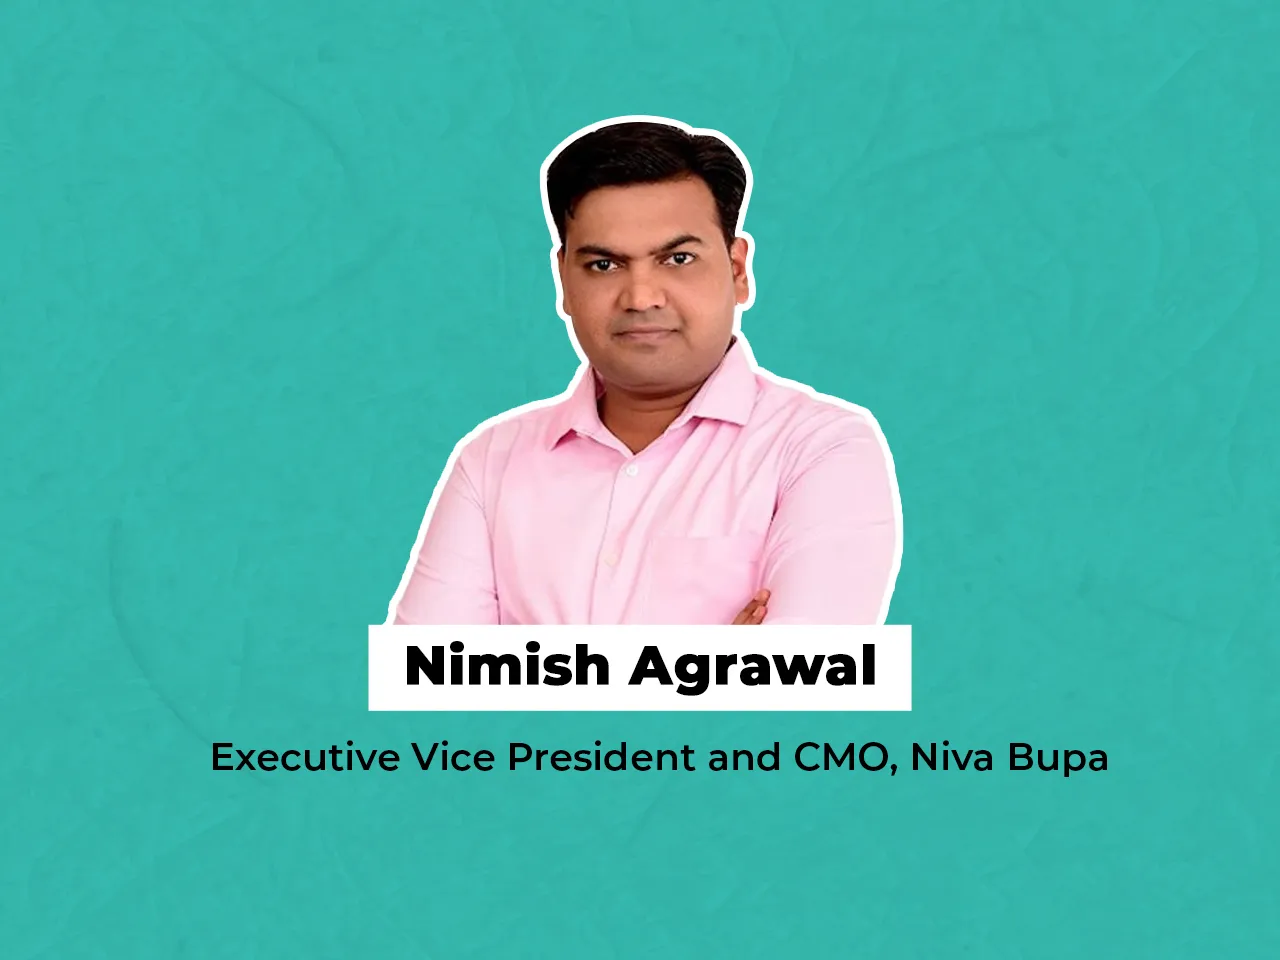 Health insurance is a category that has not been marketed enough: Niva Bupa’s Nimish Agrawal